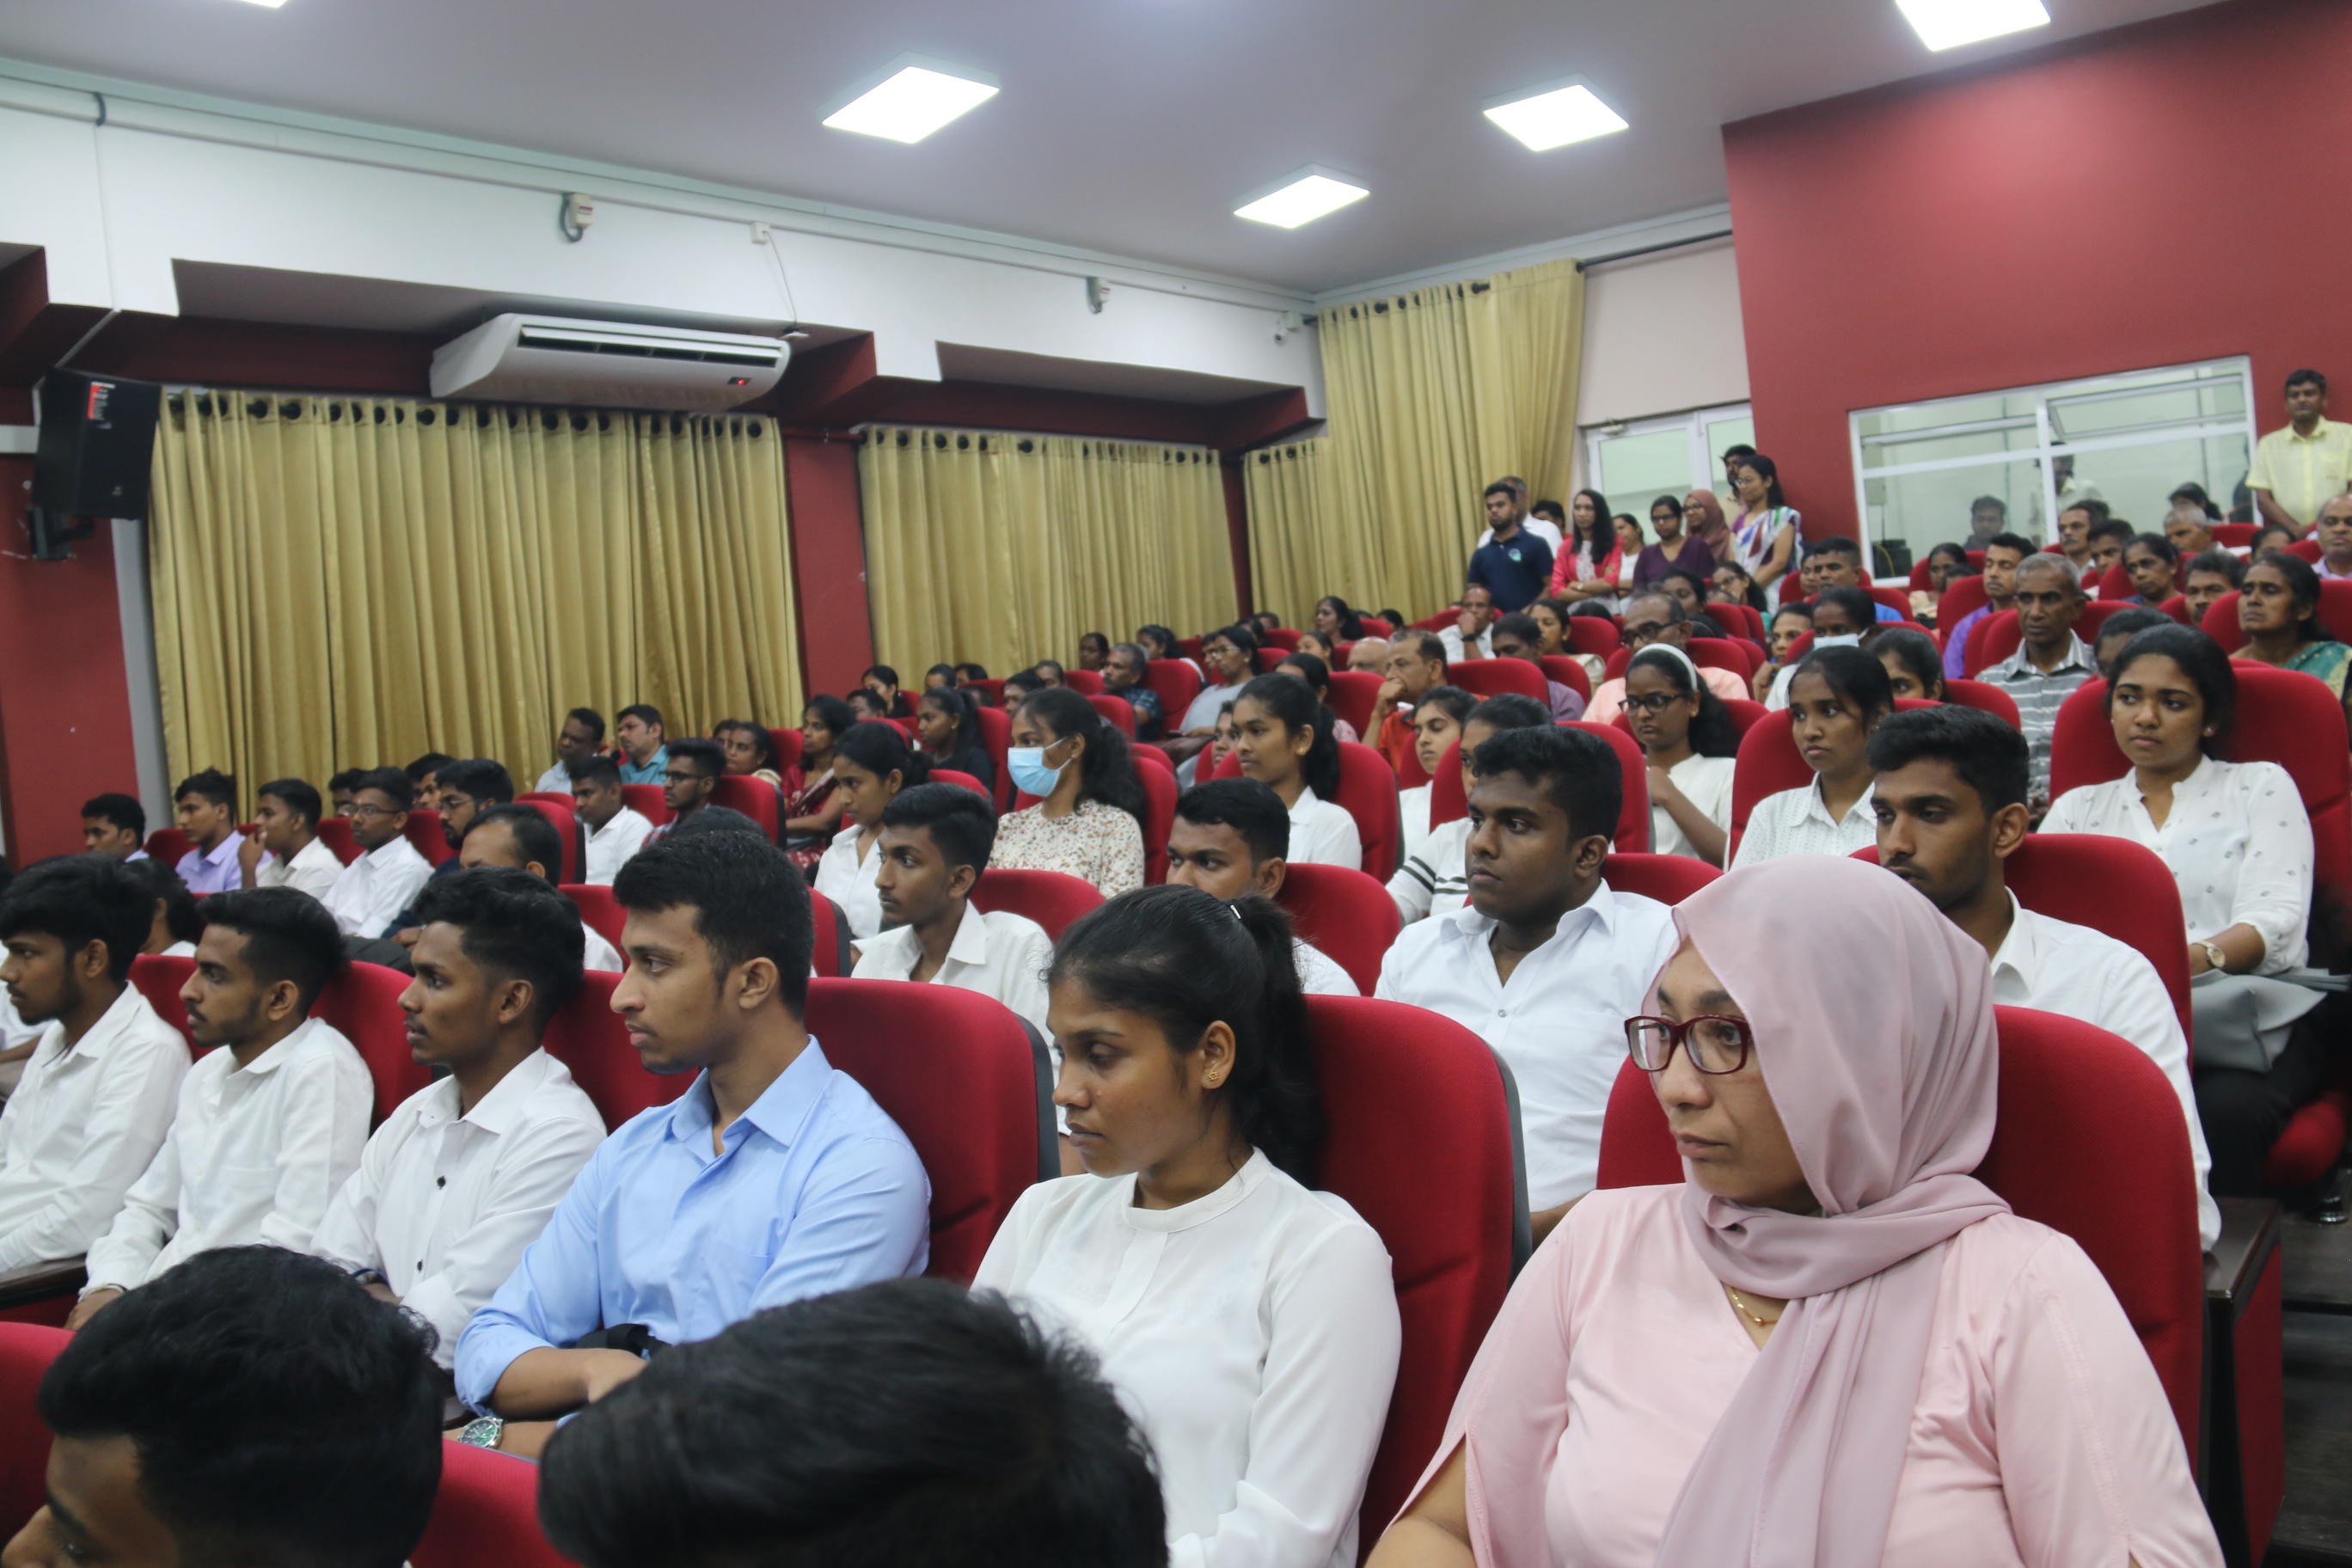 ORIENTATION PROGRAM FOR THE 2022/2023 BATCH OF THE DEPARTMENT OF INDUSTRIAL MANAGEMENT